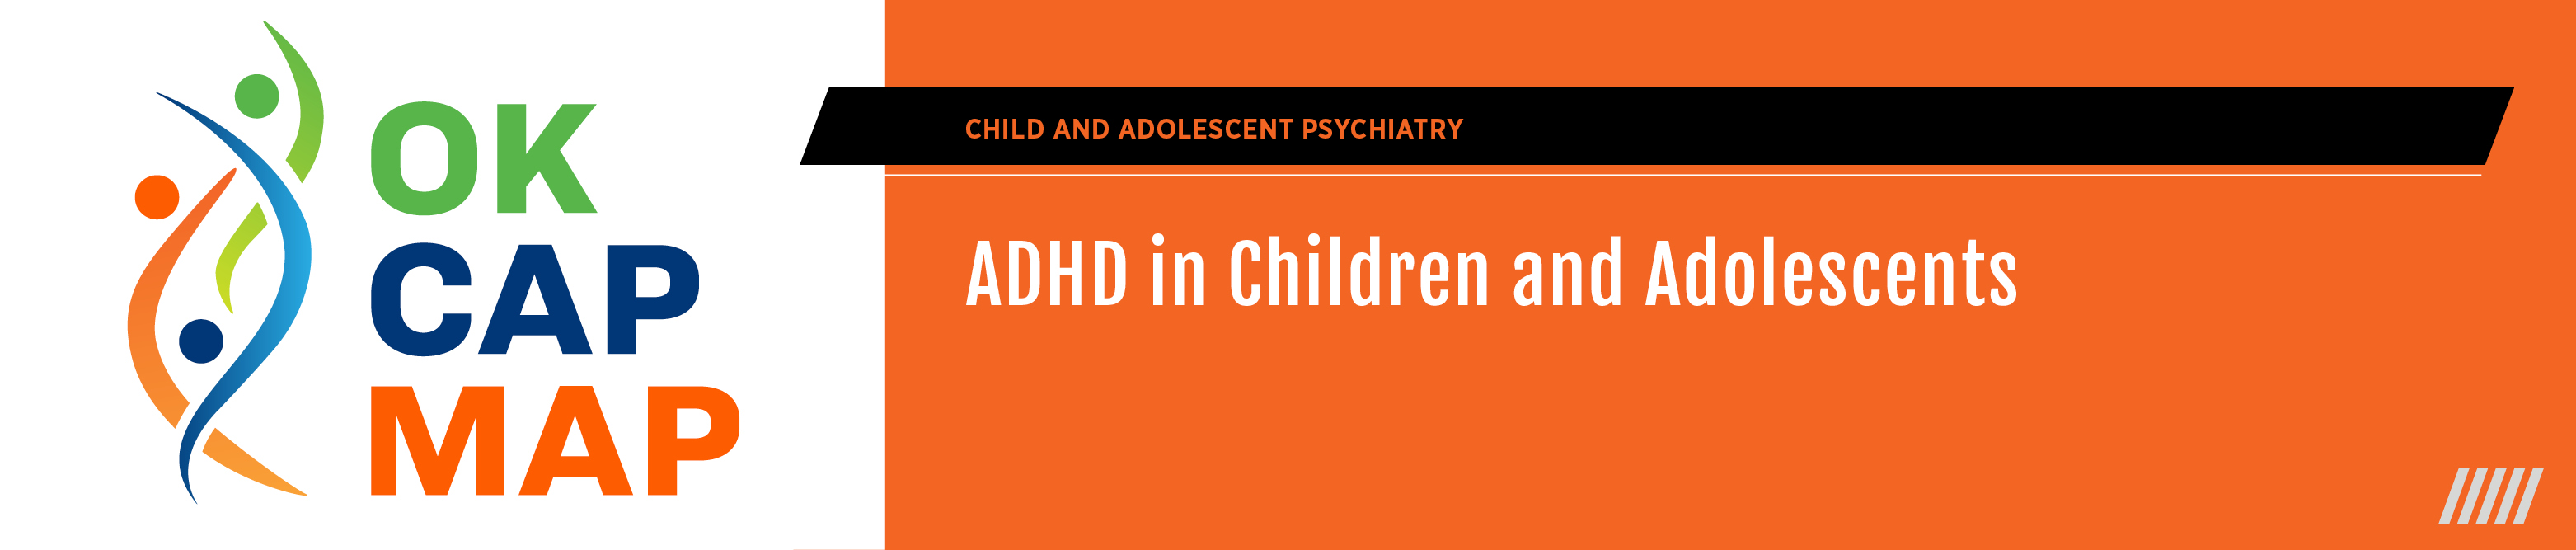 OKCAPMAP: ADHD in Children and Adolescents Banner